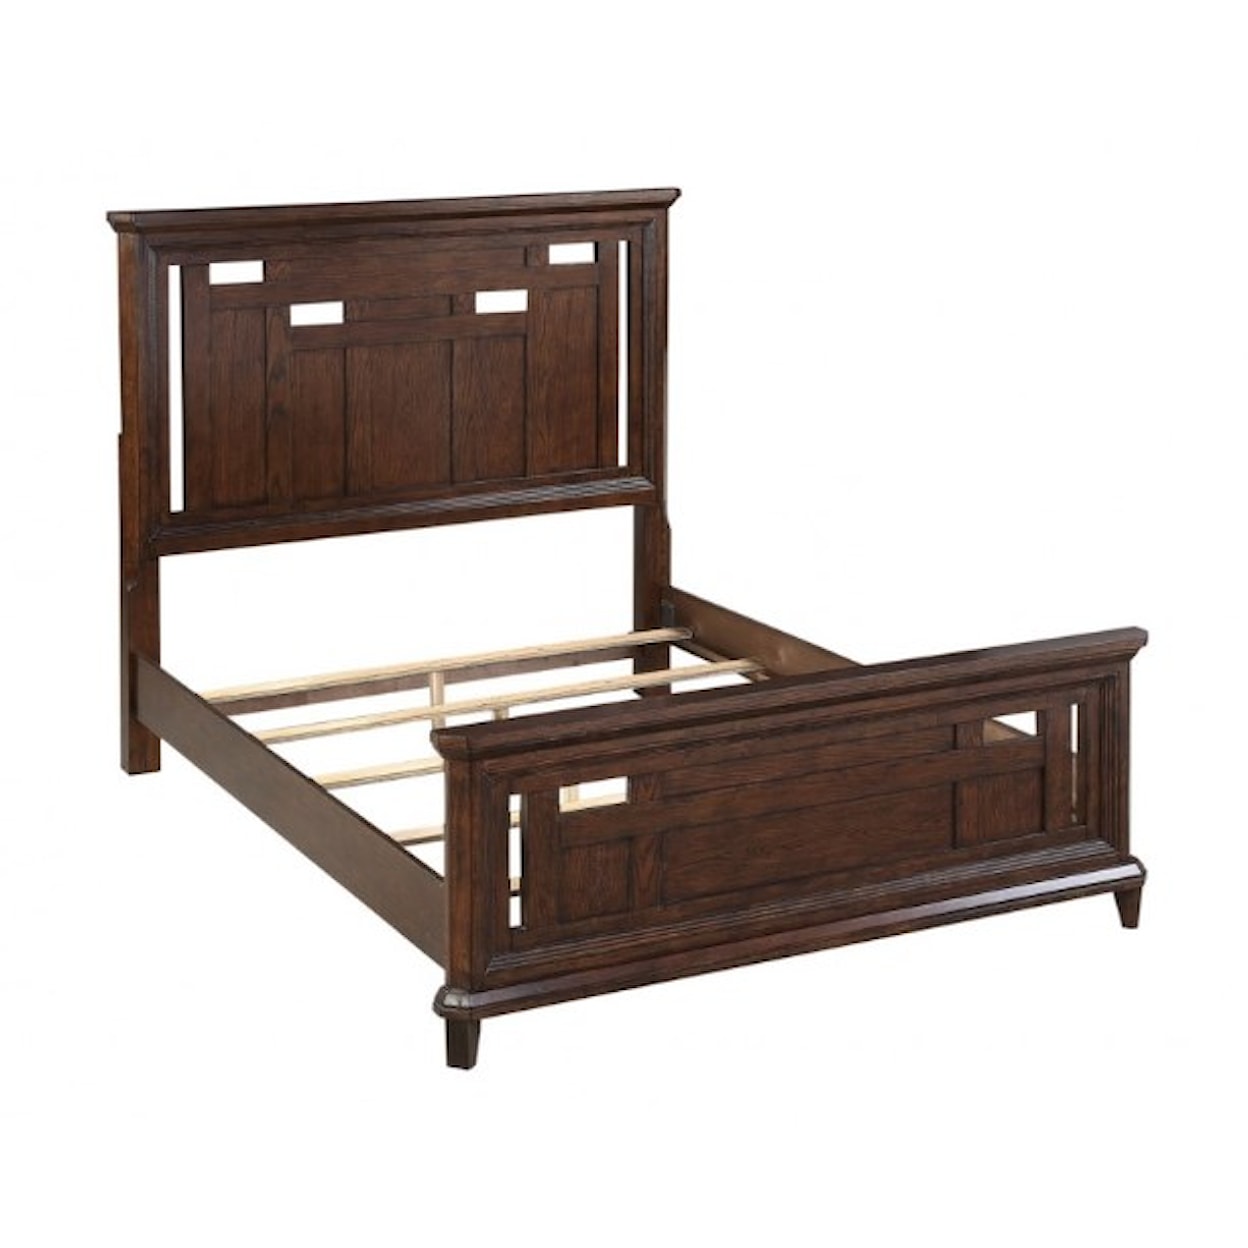 Winners Only Kentwood King Panel Bed